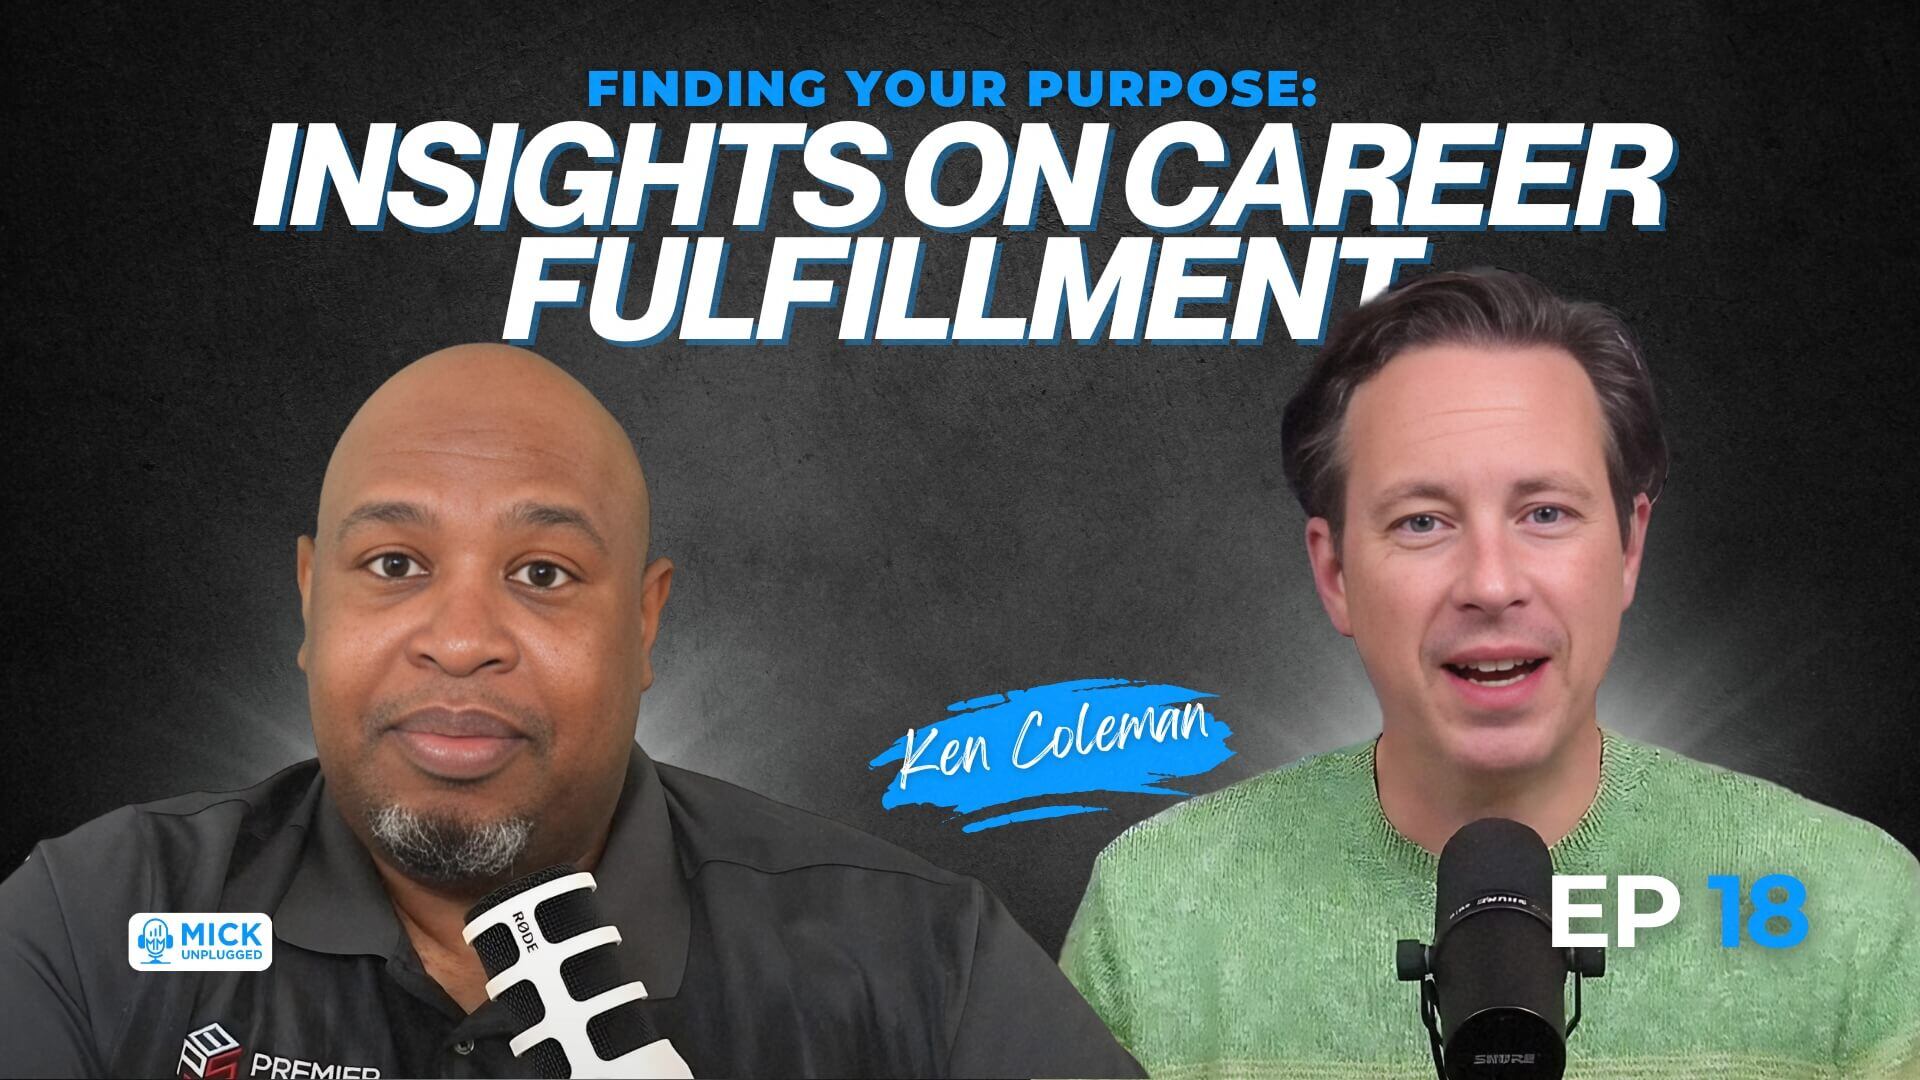 Ken Coleman | Finding Your Purpose: Insights on Career Fulfillment - Mick Unplugged